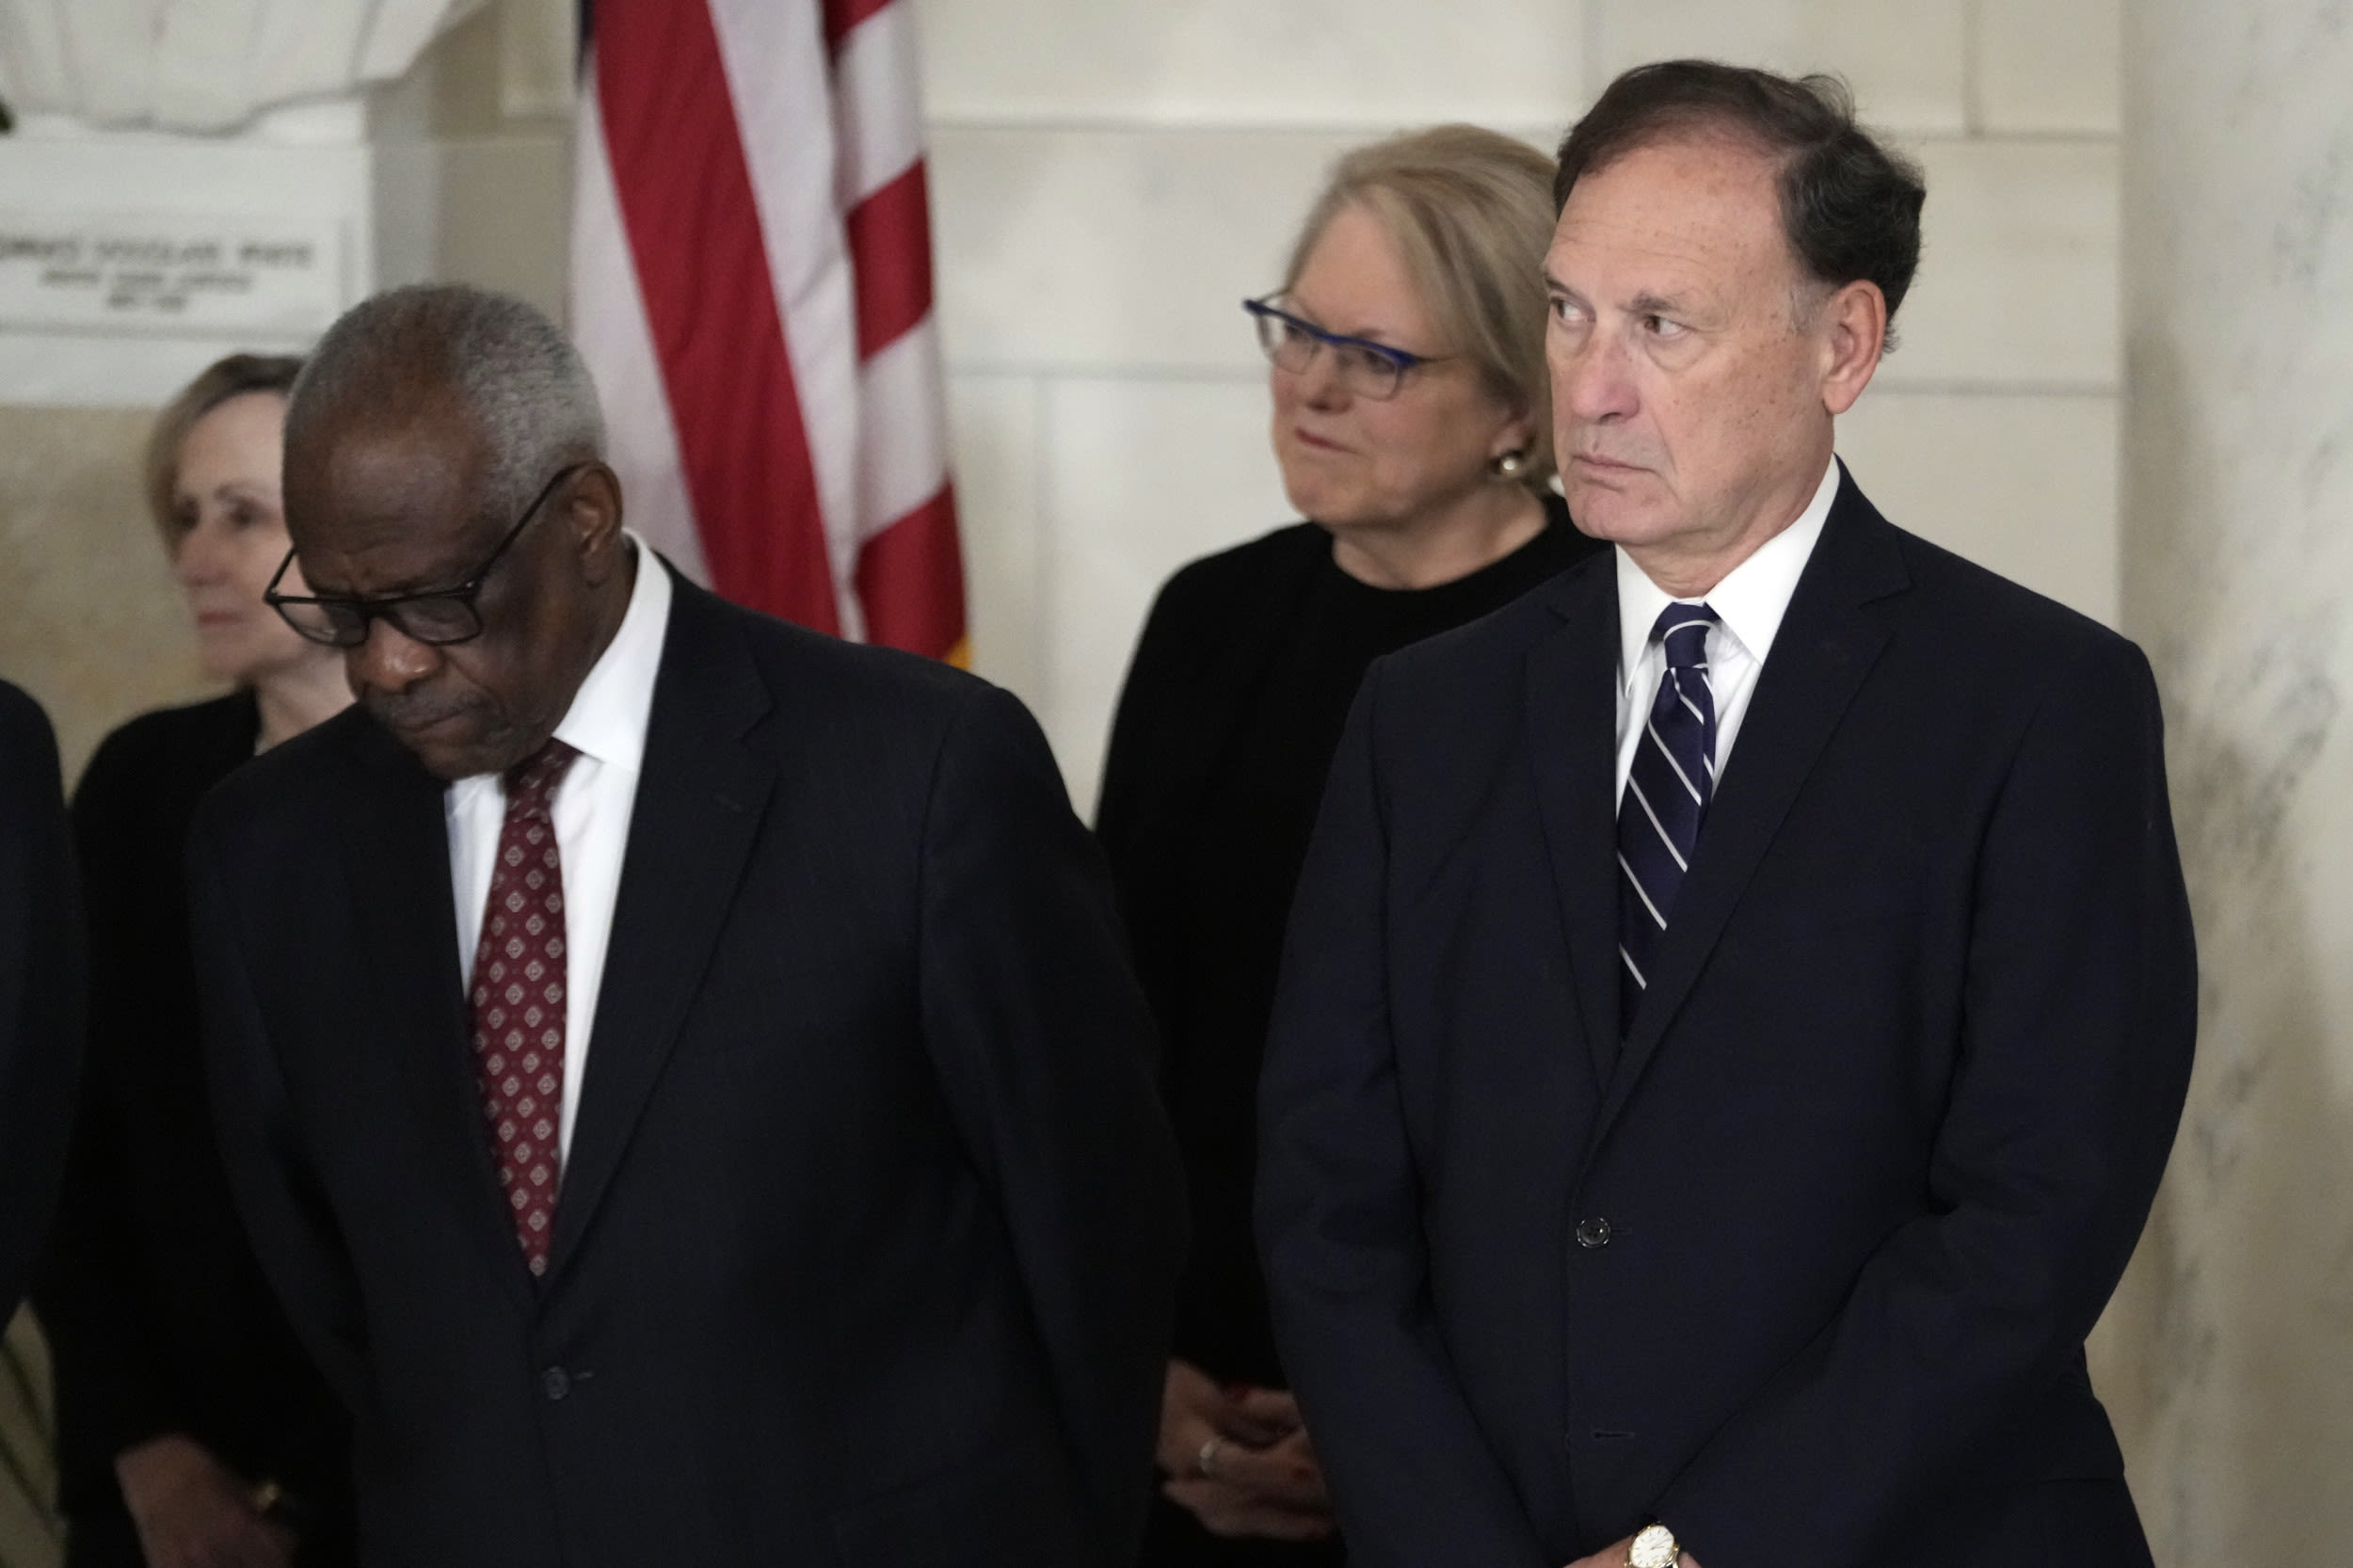 Justices Alito and Thomas' ruling raises questions of favoritism: Attorney